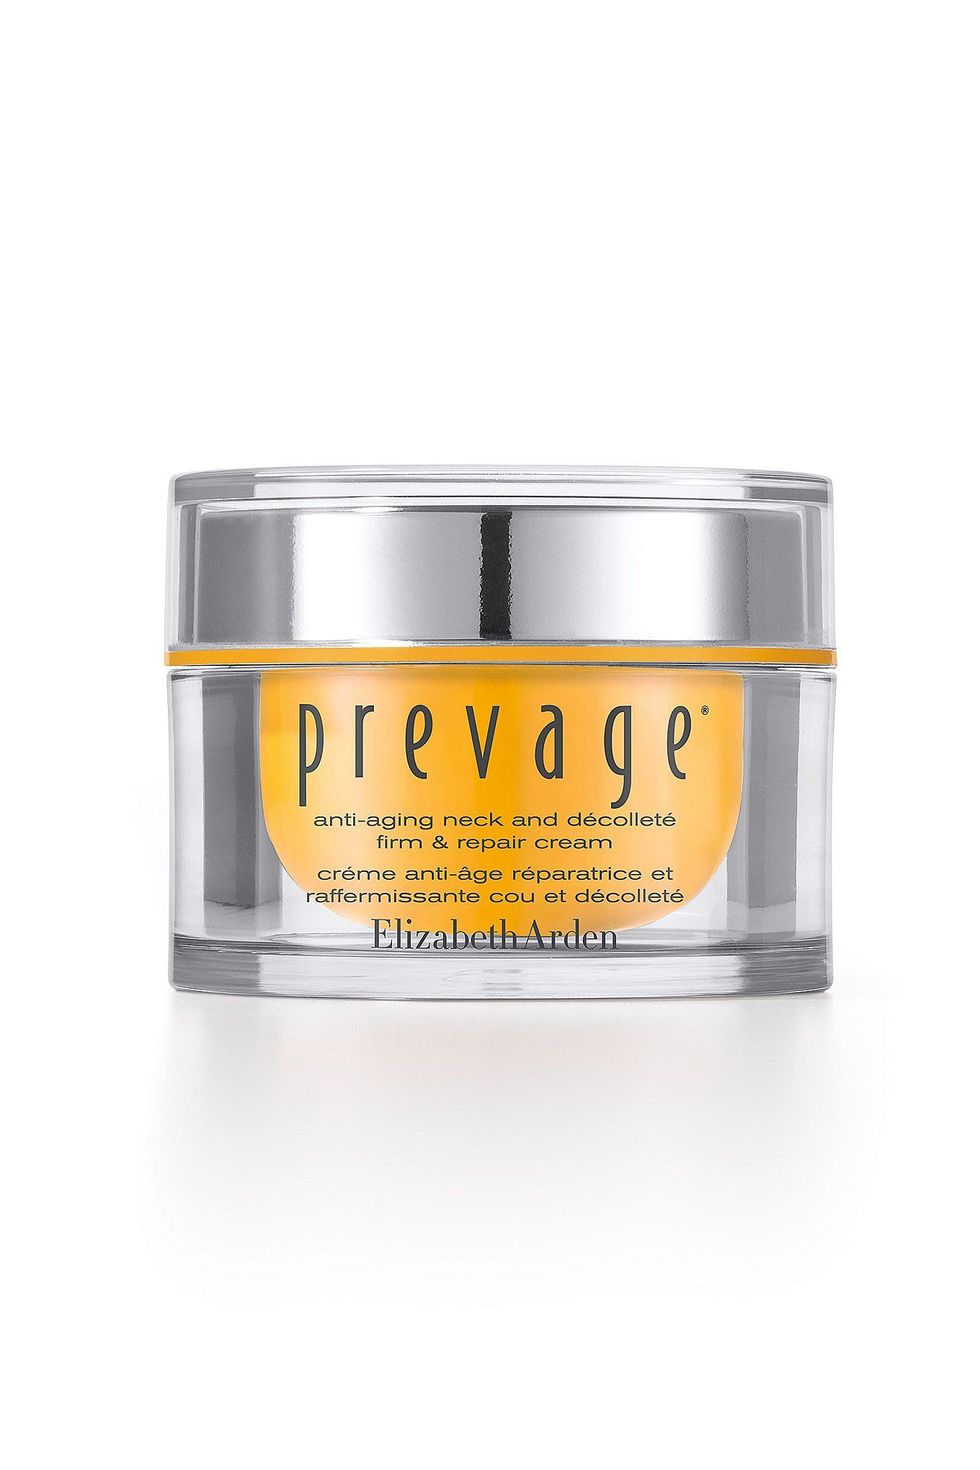 PREVAGE Anti-aging Neck and Decollete Firm and Repair Cream